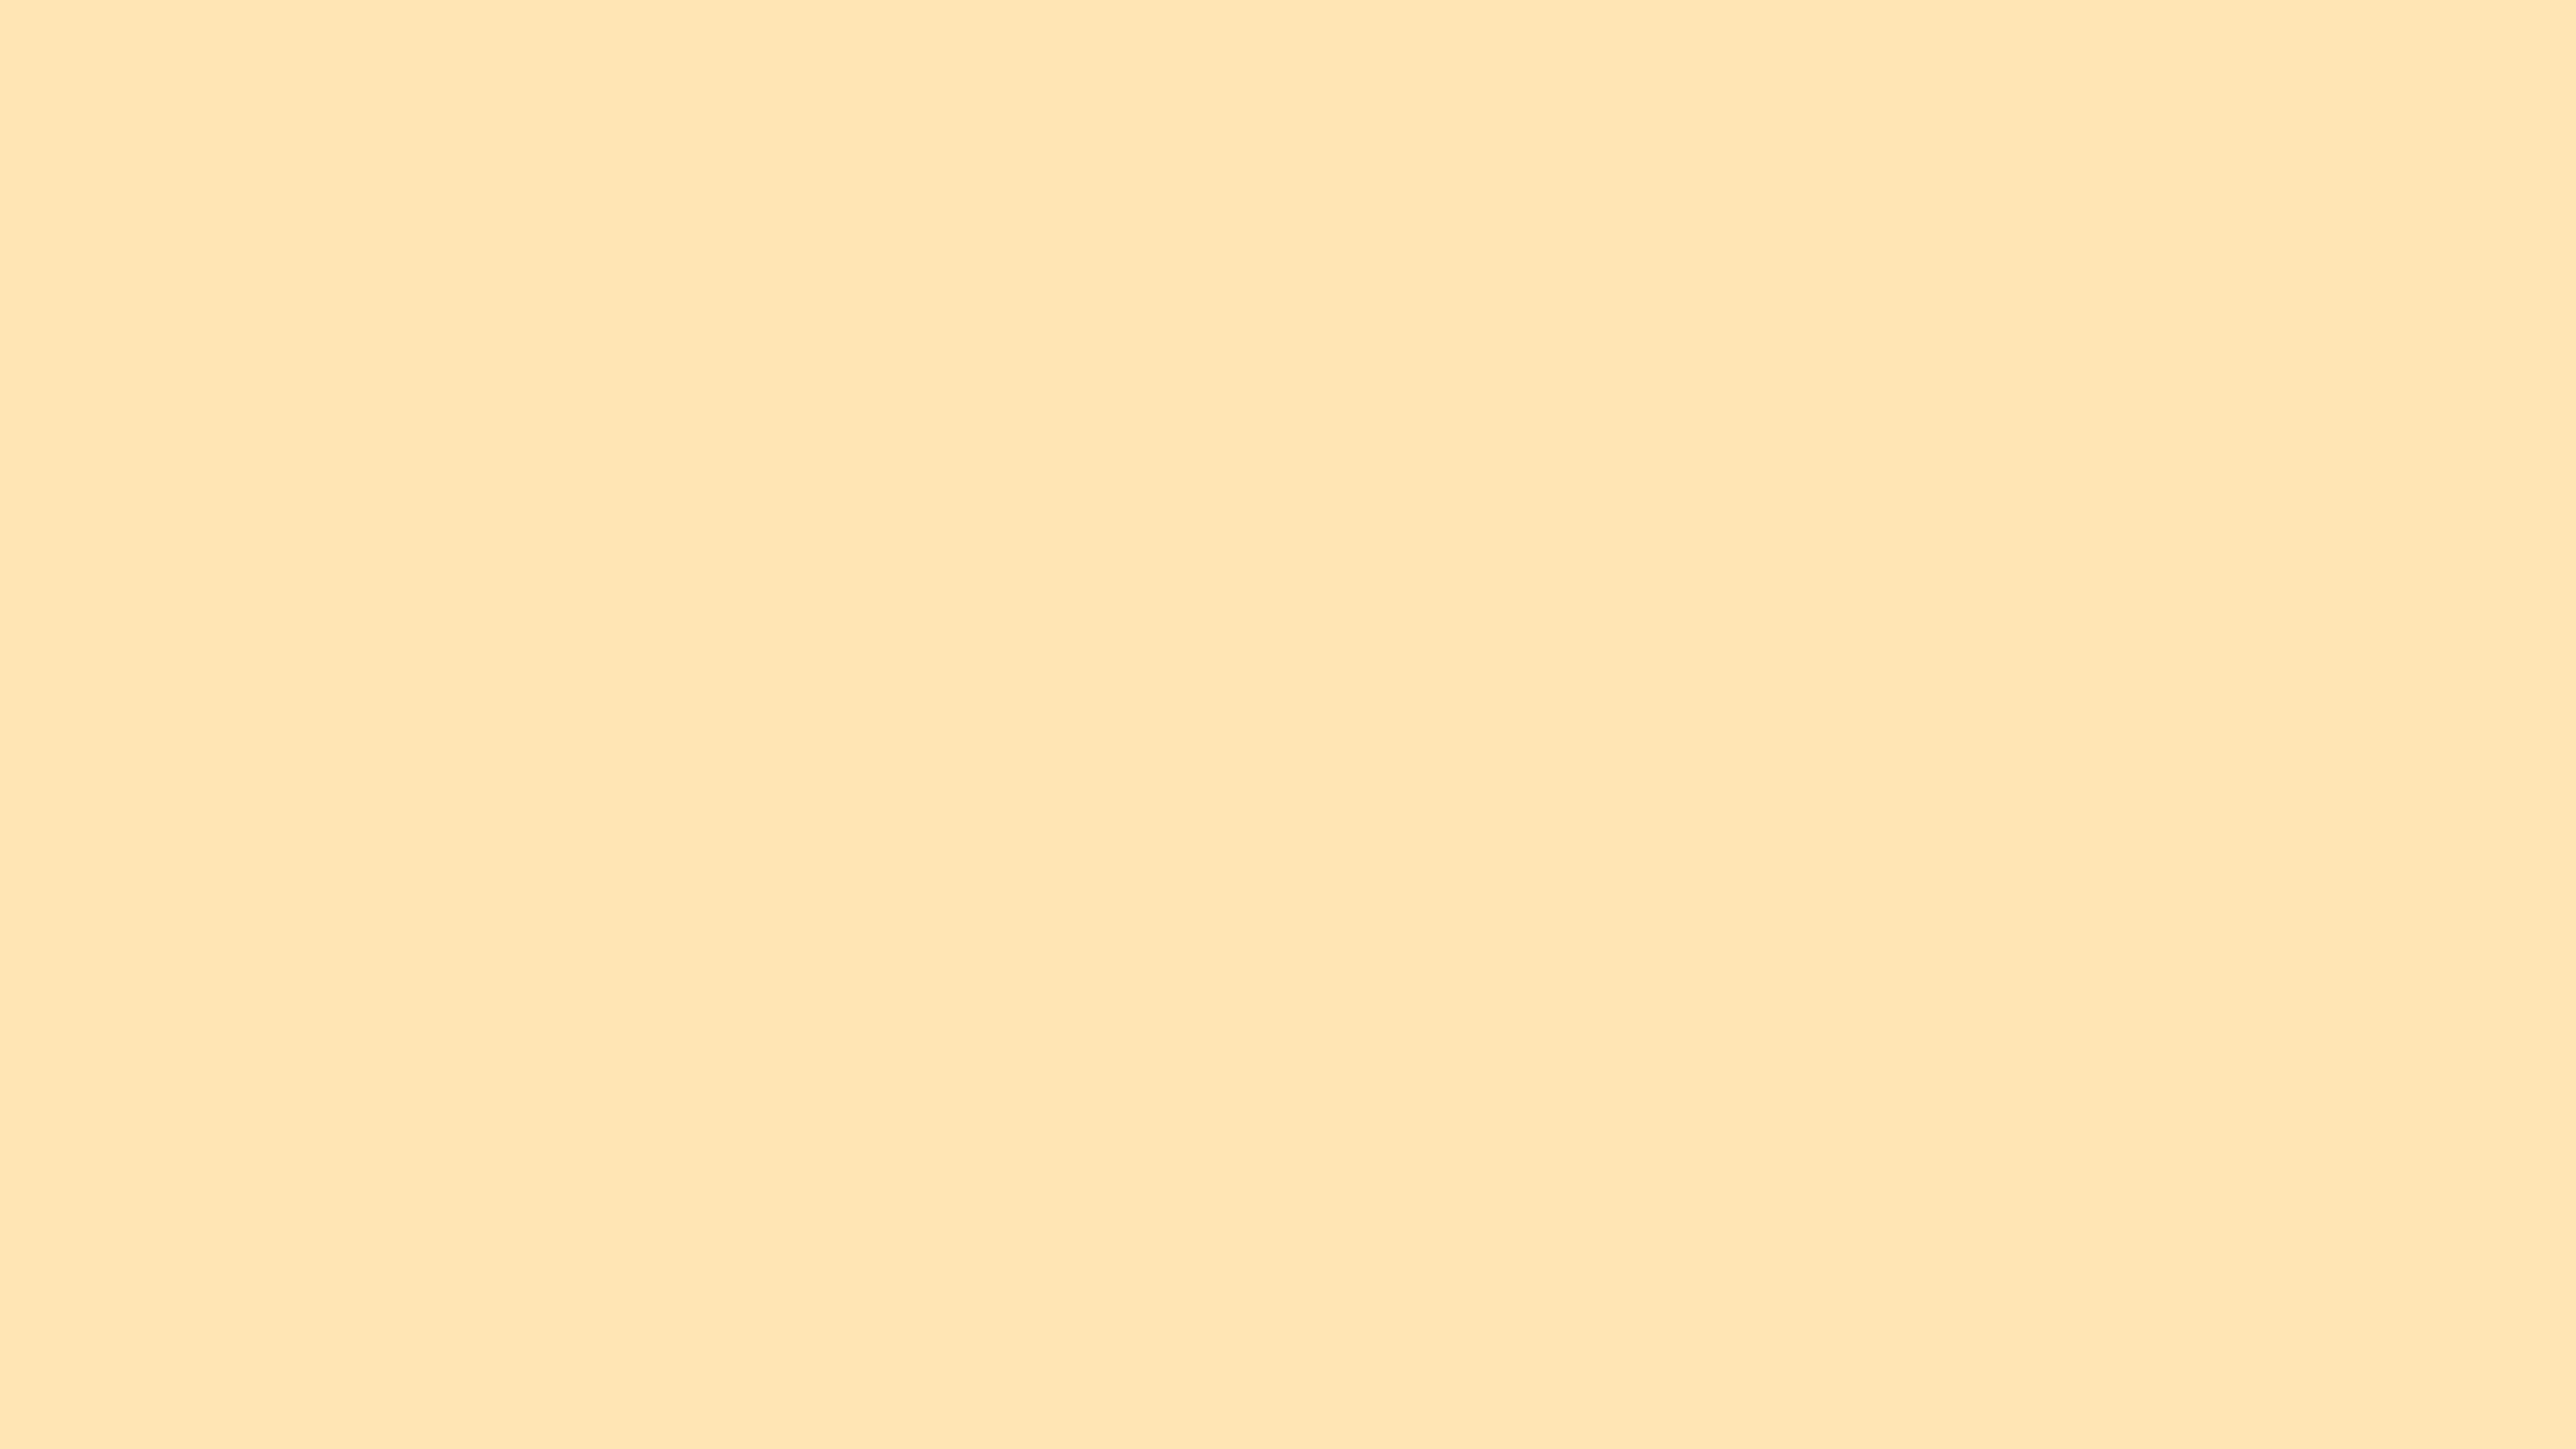 7680x4320 Peach Solid Color Background